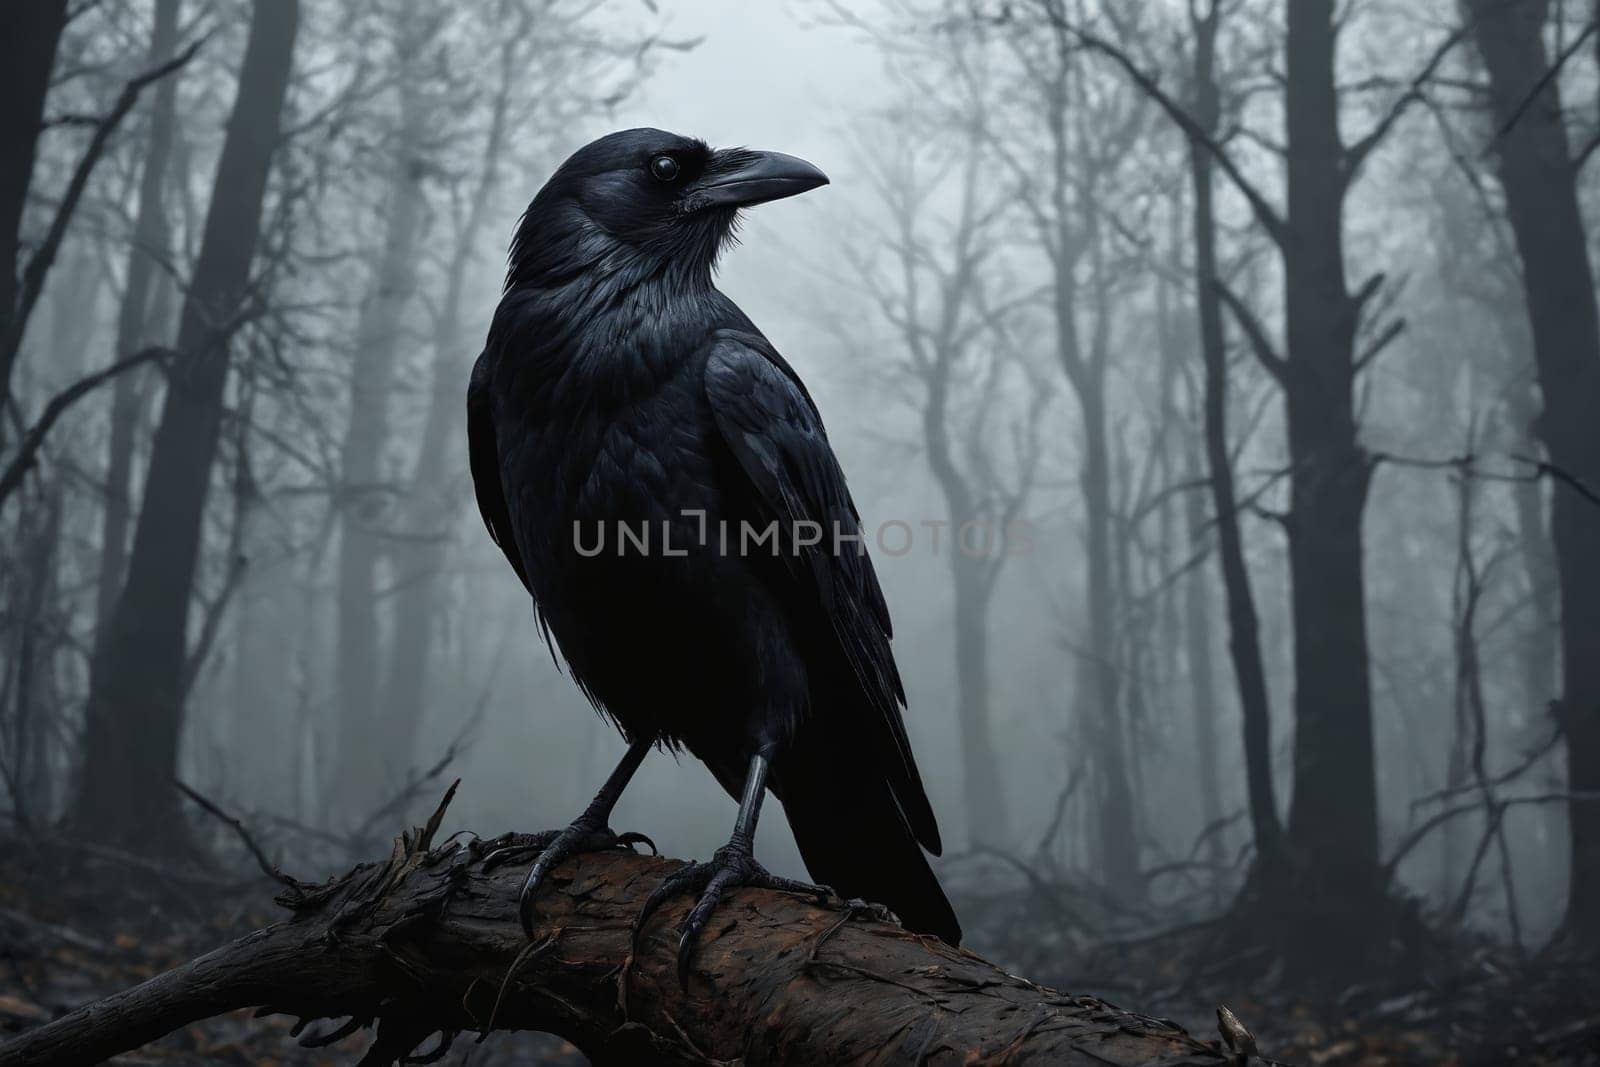 Gothic Intrigue Captured by a Shimmering Raven Pondering Amidst Dead Leaves by Andre1ns